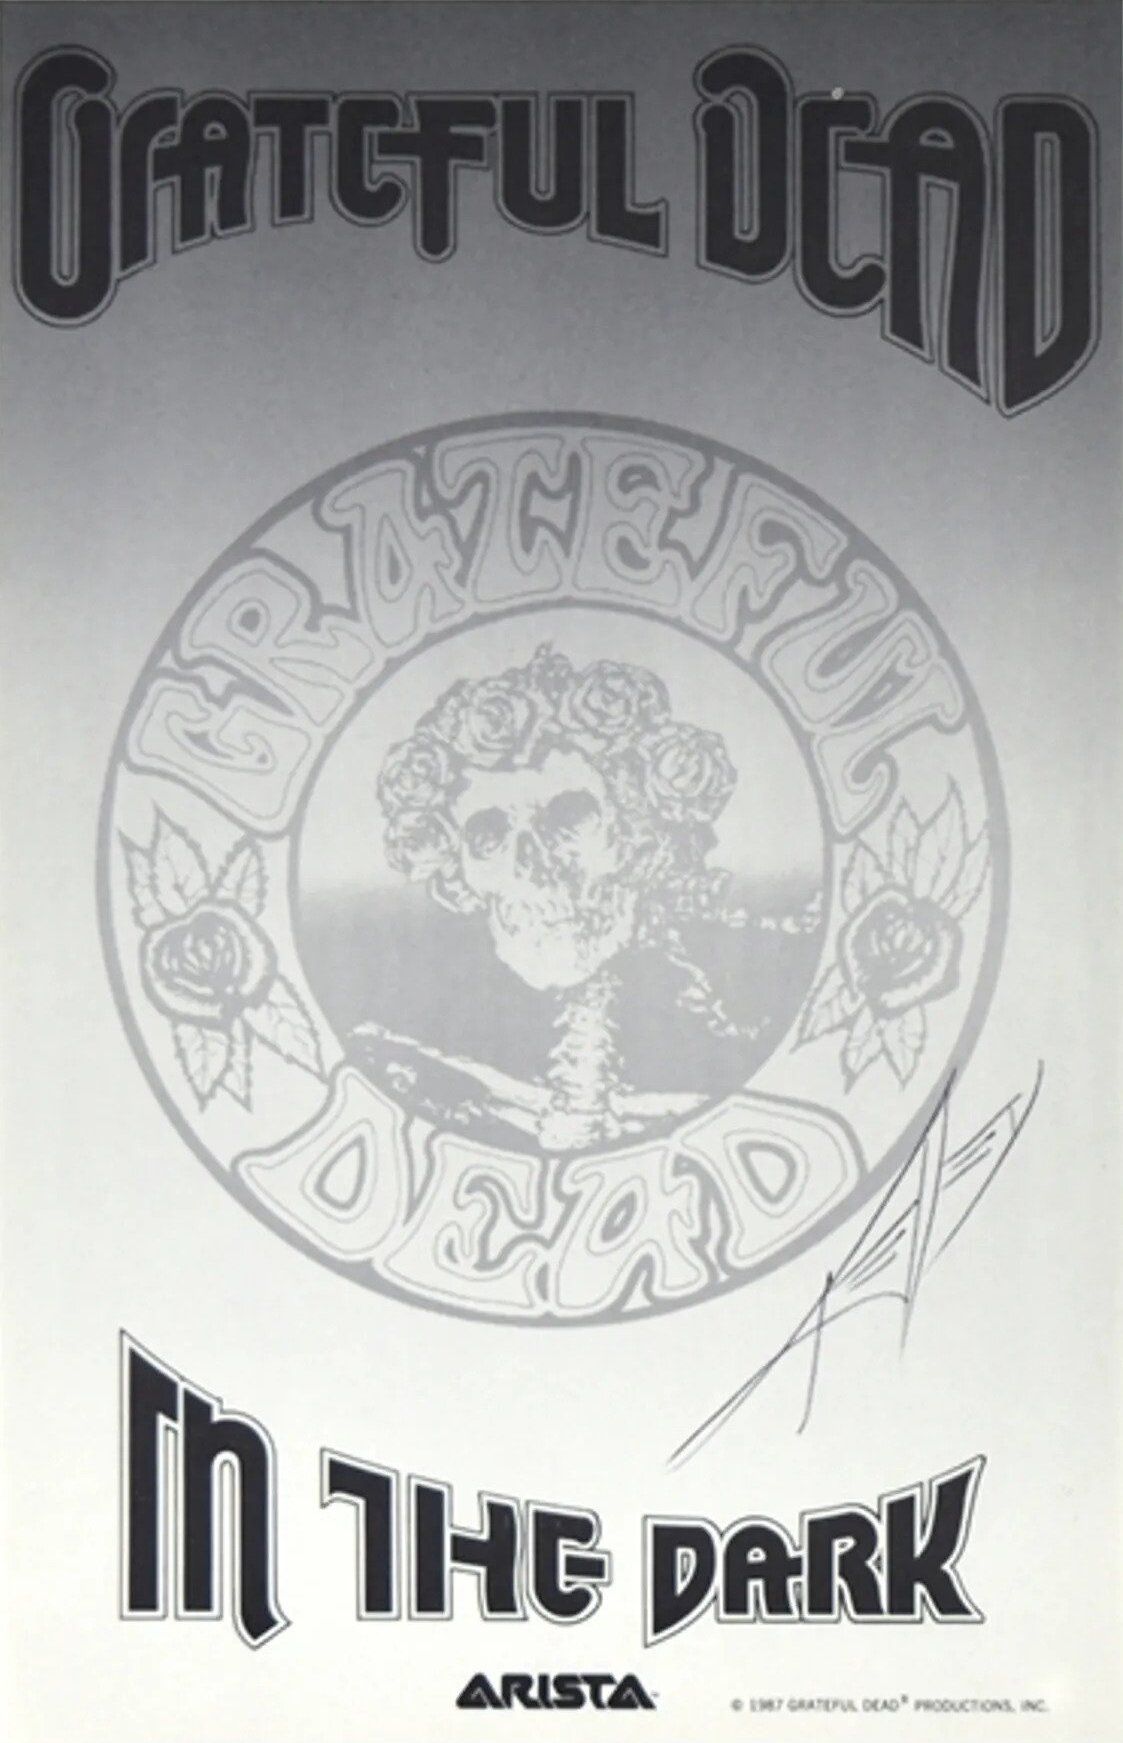 Grateful Dead In The Dark Arista Records Promotional Poster 1987 Concert Poster